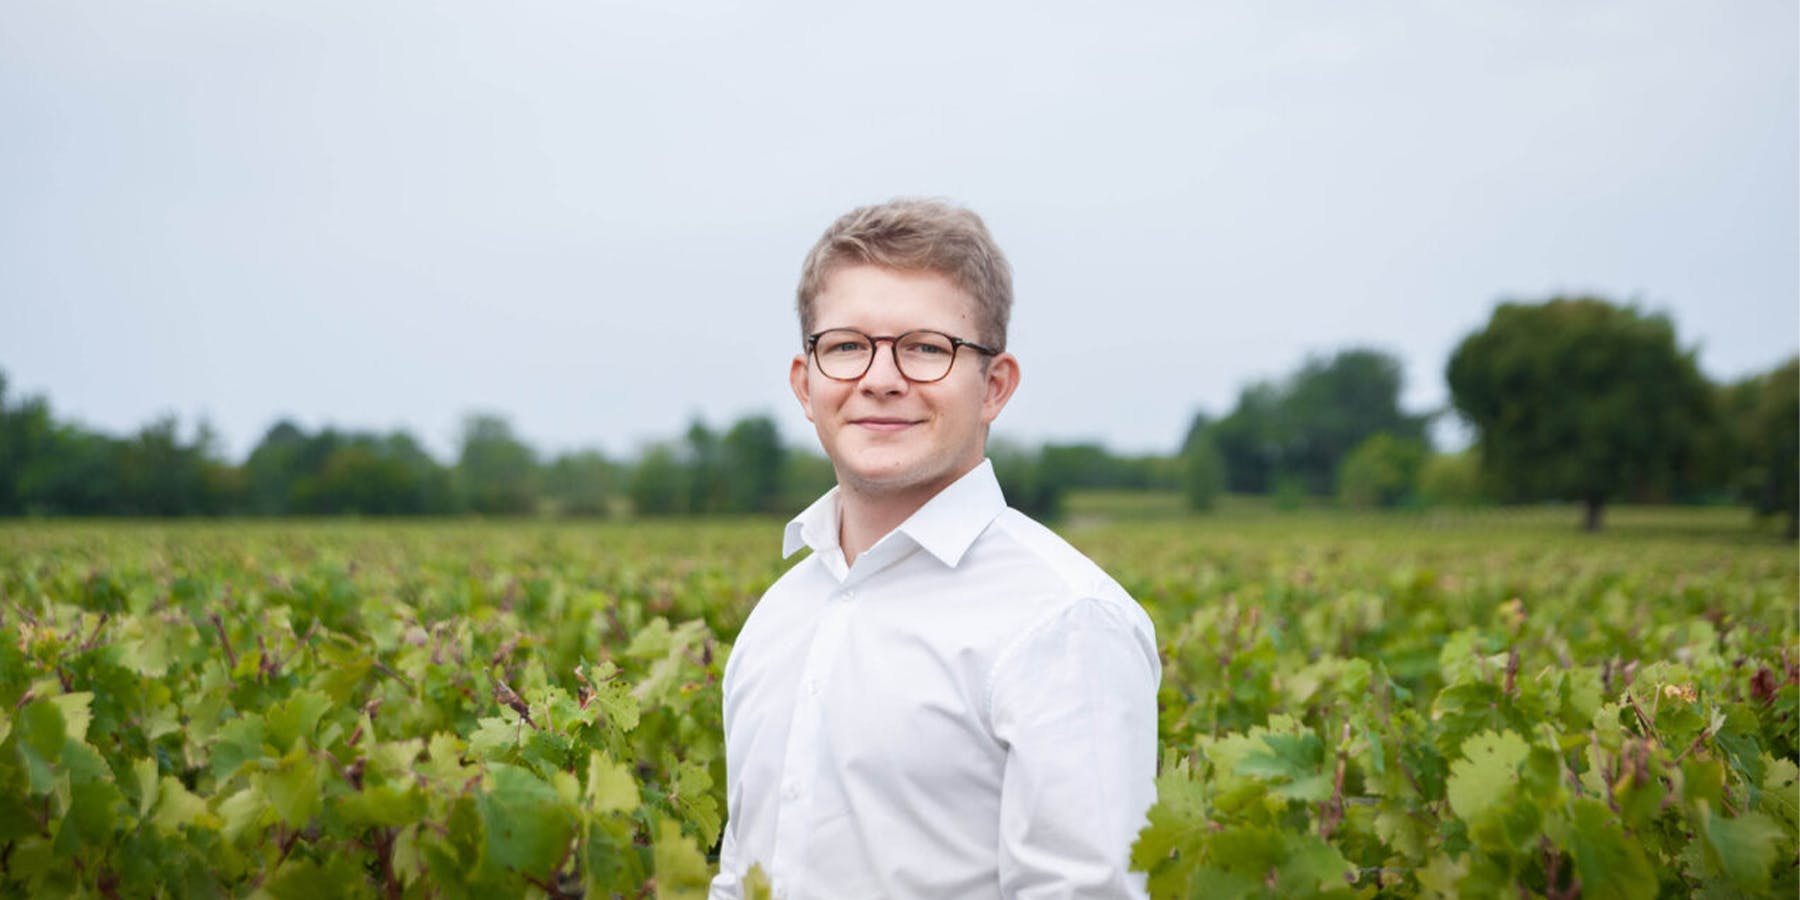 Clément has been a Senior Account Manager for 3 years now. His talent? Presenting U'wine offers to you in a simple and educational way!